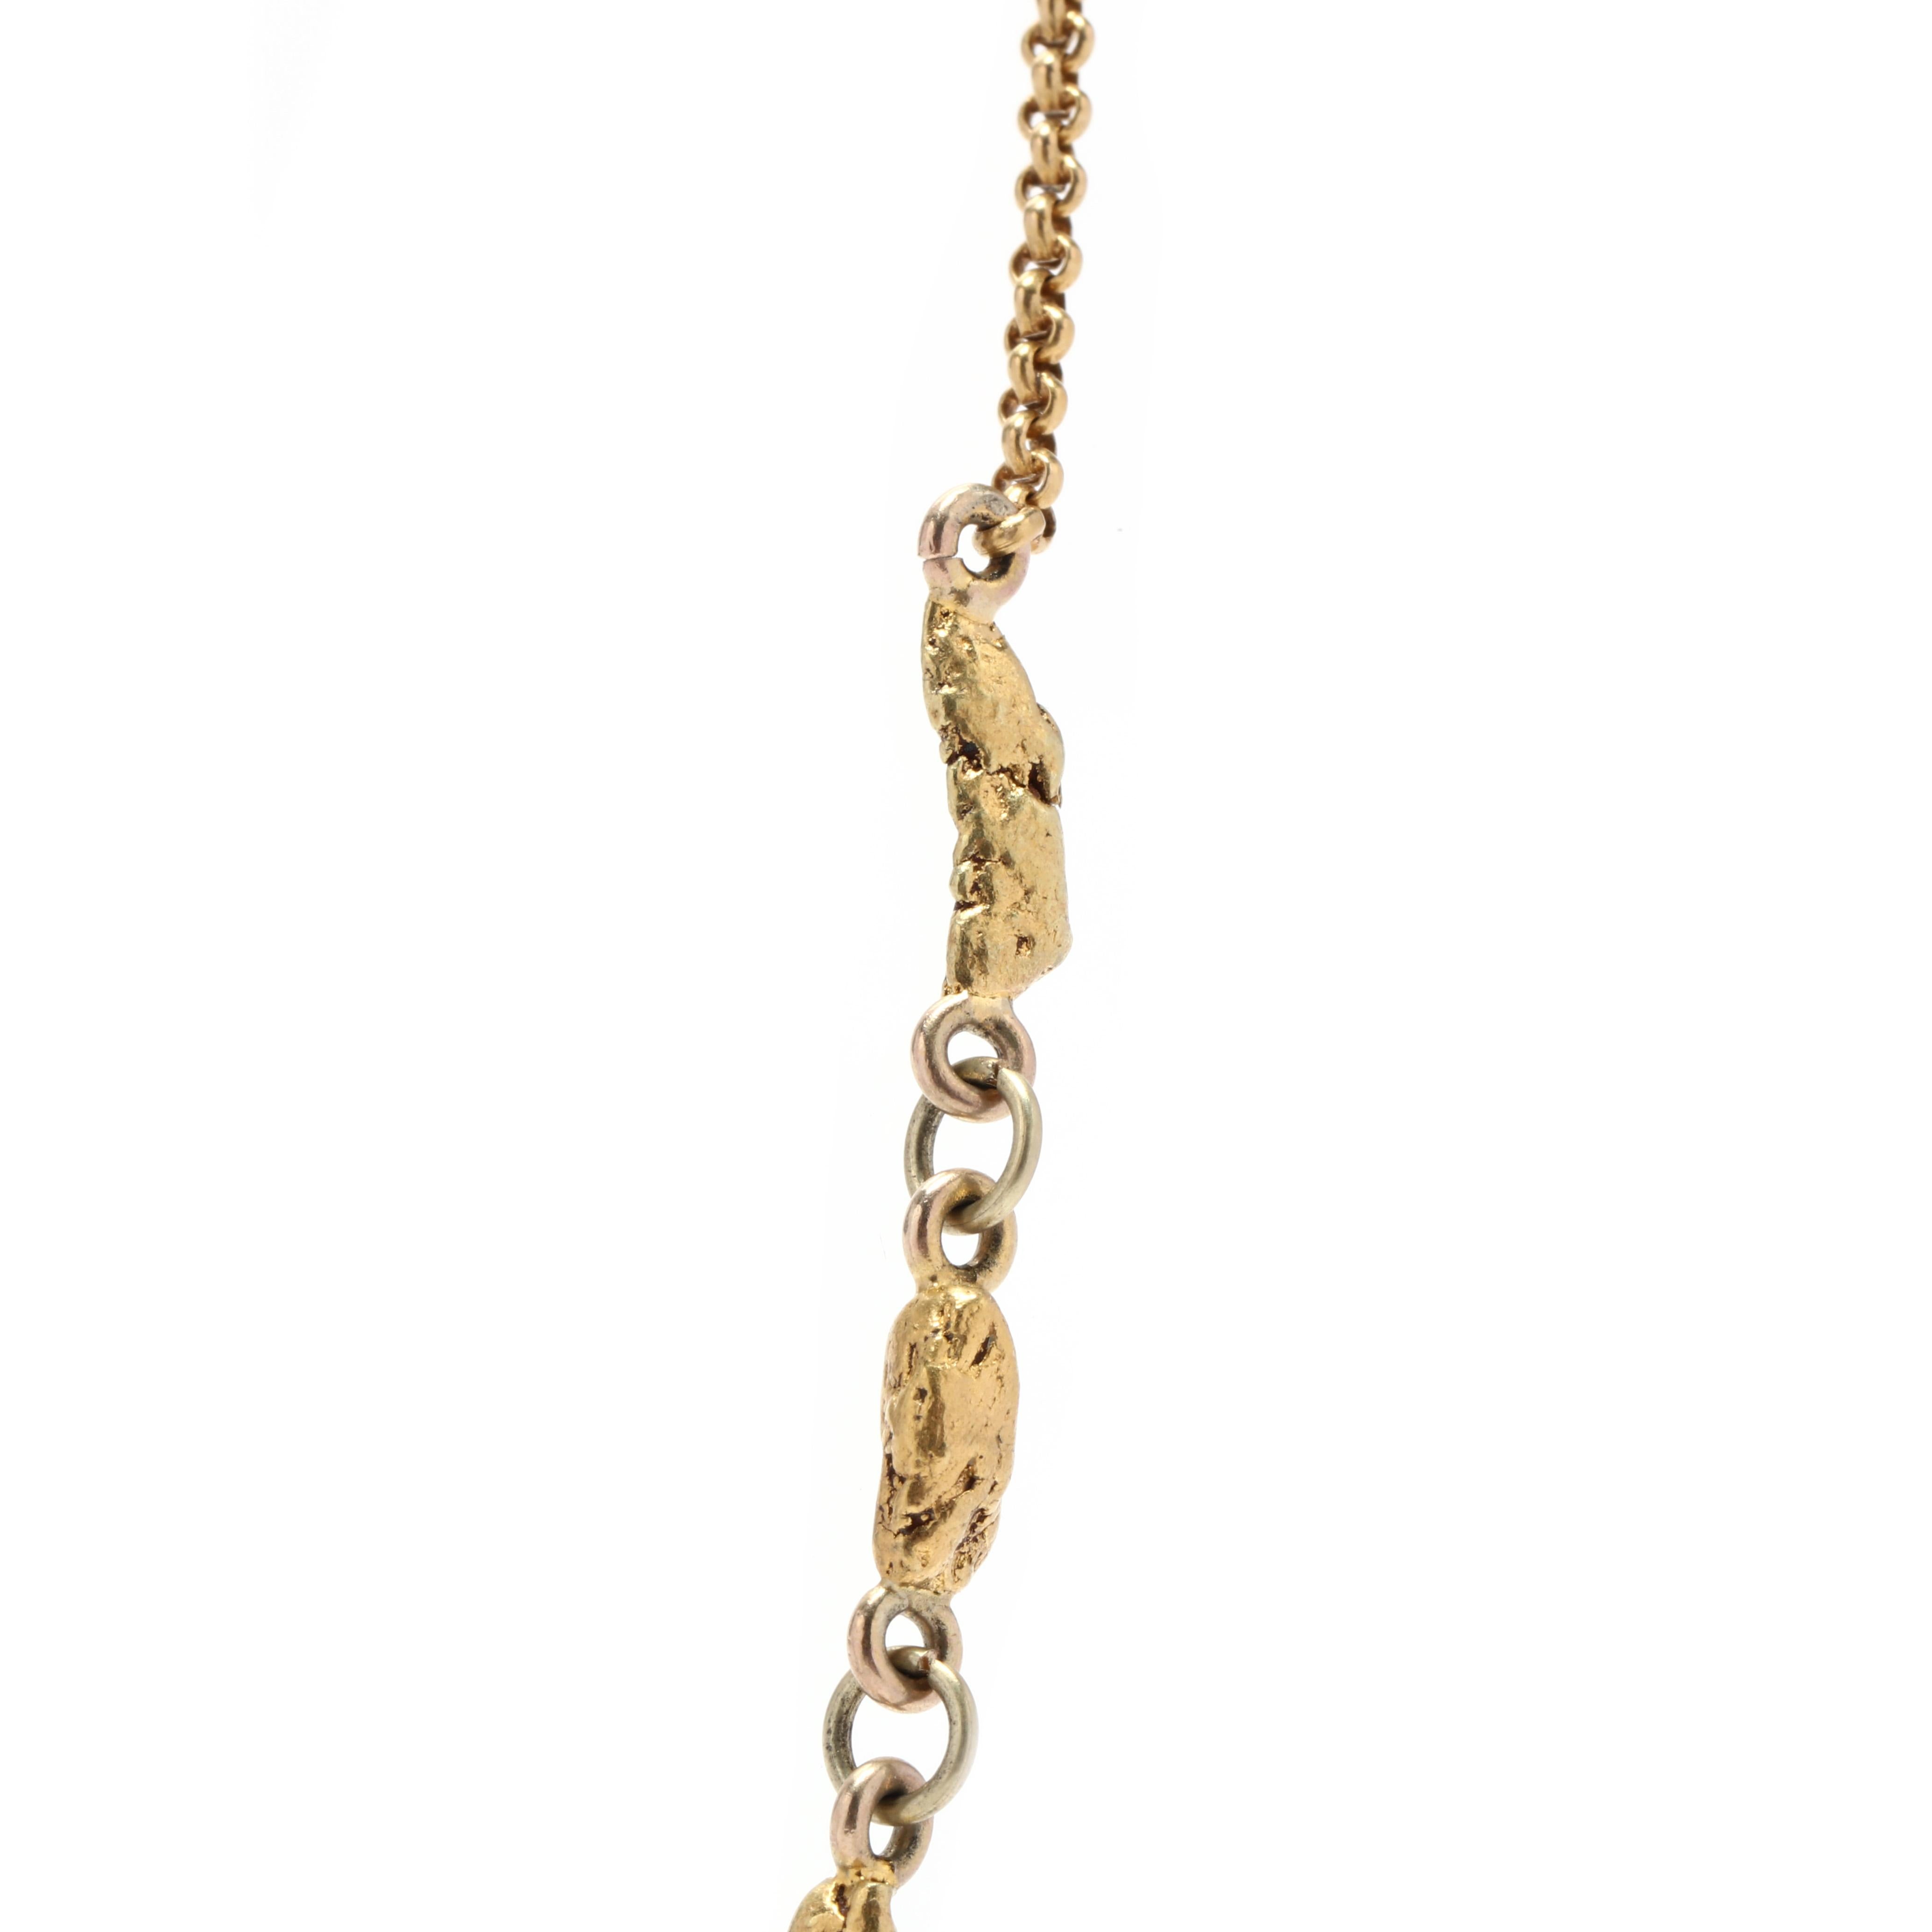 A handmade 22 and 18 karat yellow gold nugget chain. This chain features 22 karat gold nuggets linked together in the center with an 18 karat gold rolo chain on either side with a spring ring clasp.



Length: 15 in.



Width: 4.6 mm



Weight: 7.9